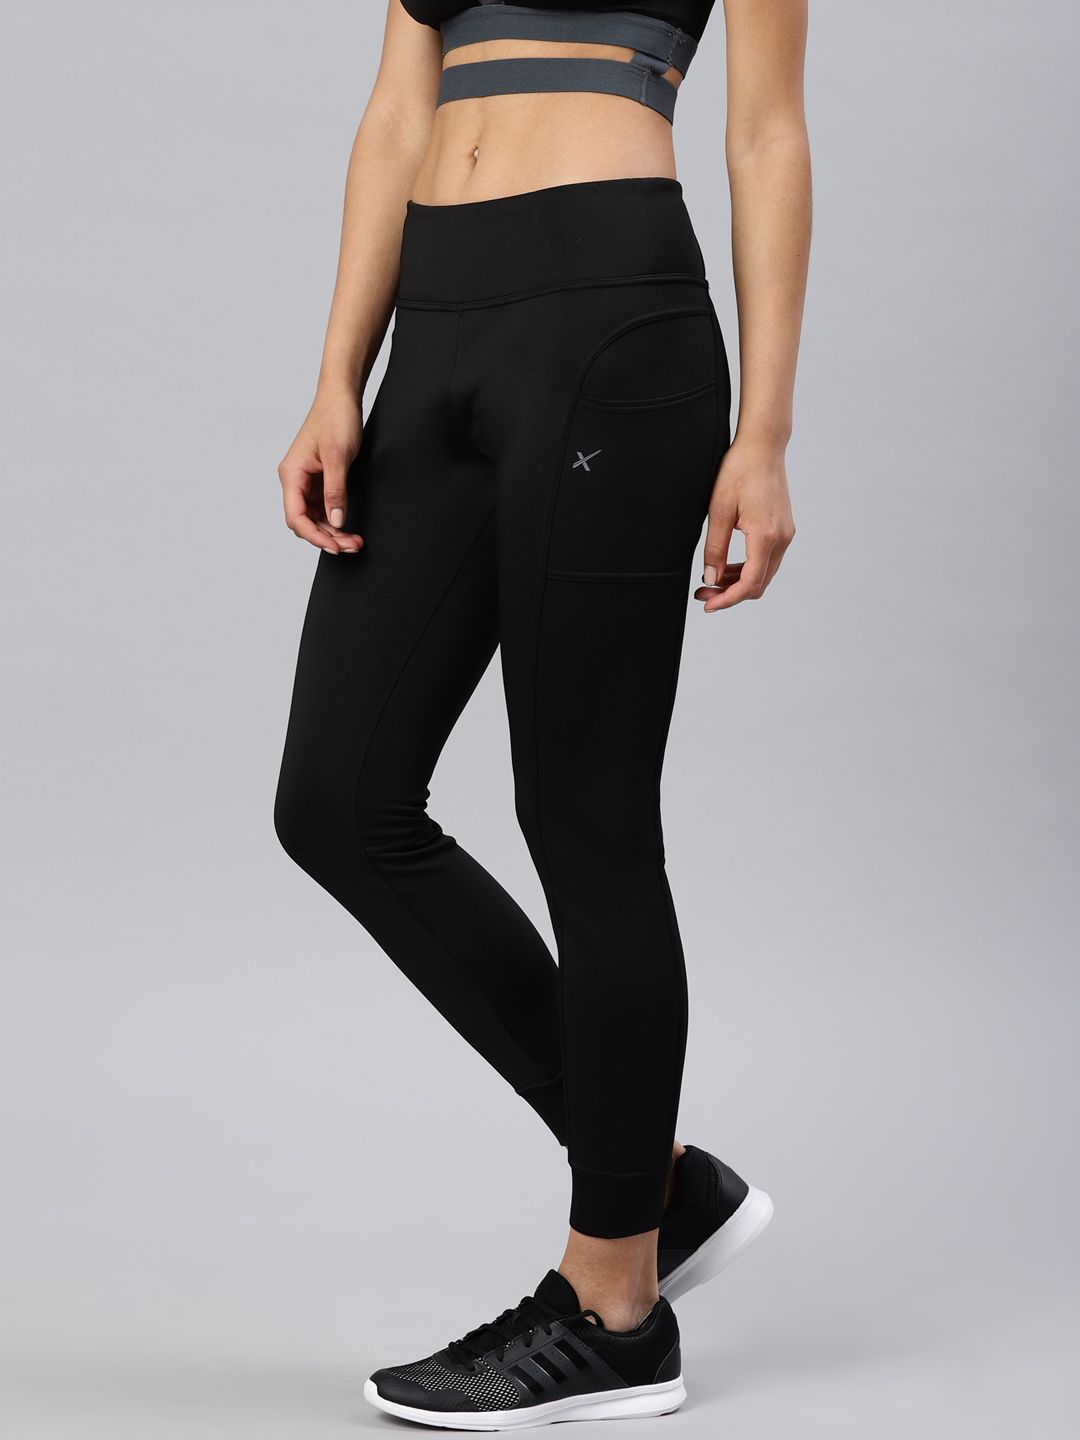 HRX by Hrithik Roshan Black Ankle Length Track pants Price in India